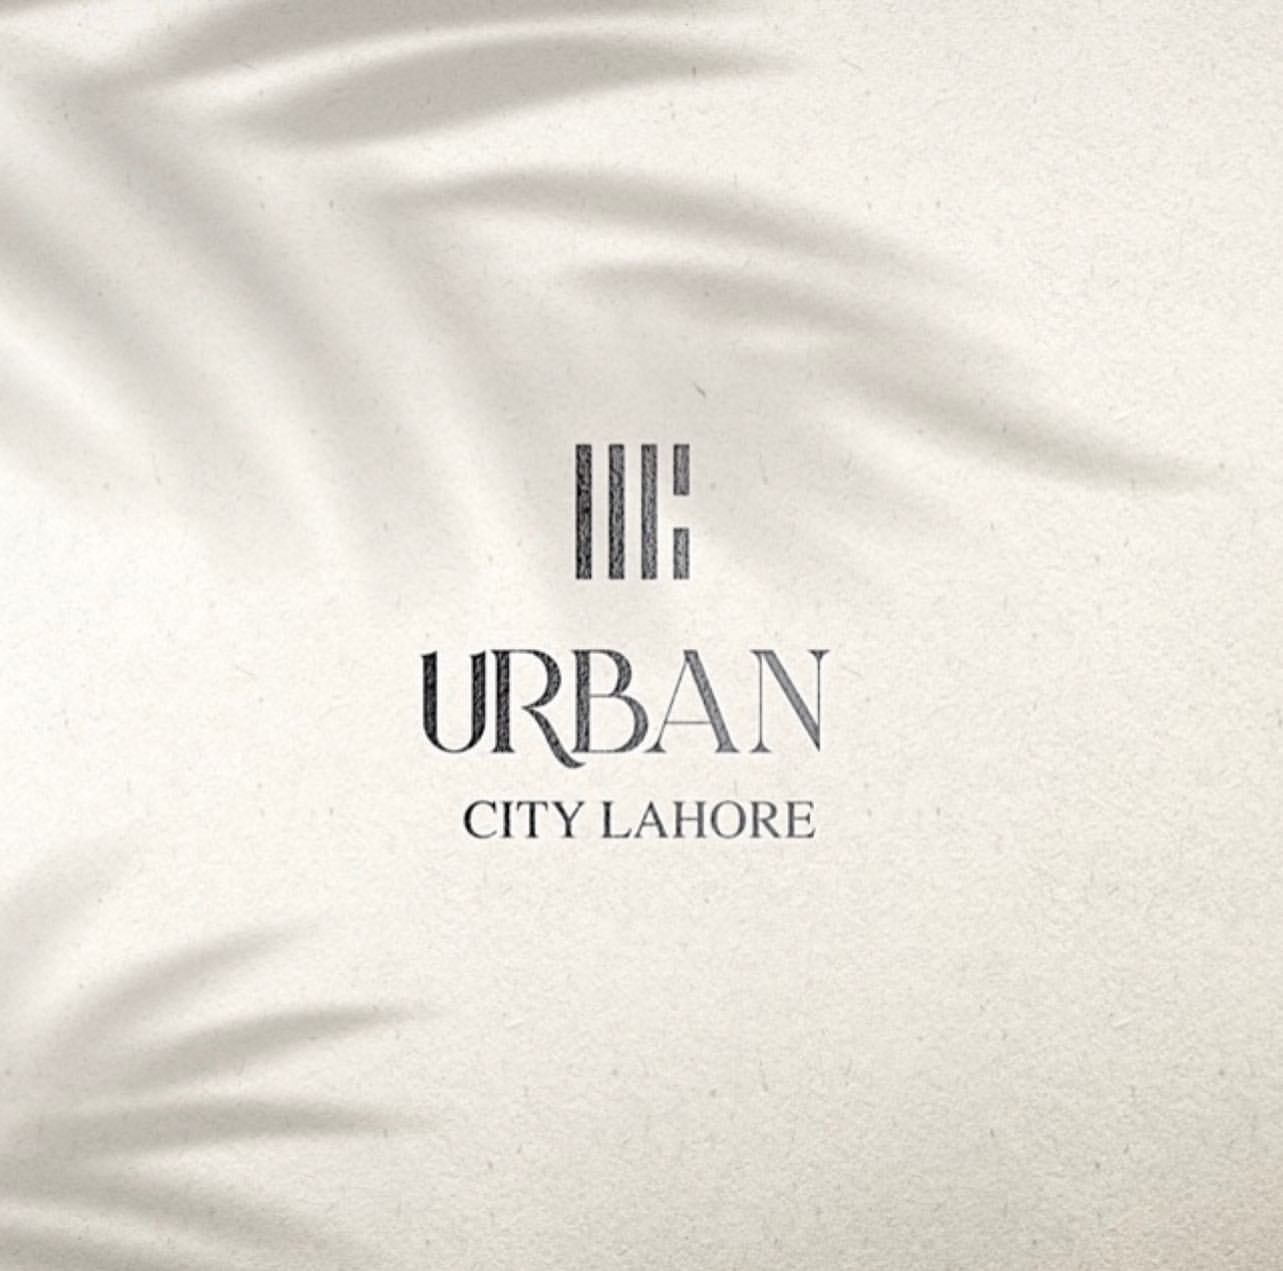 Urban City Lahore Payment Plan, Location and Details